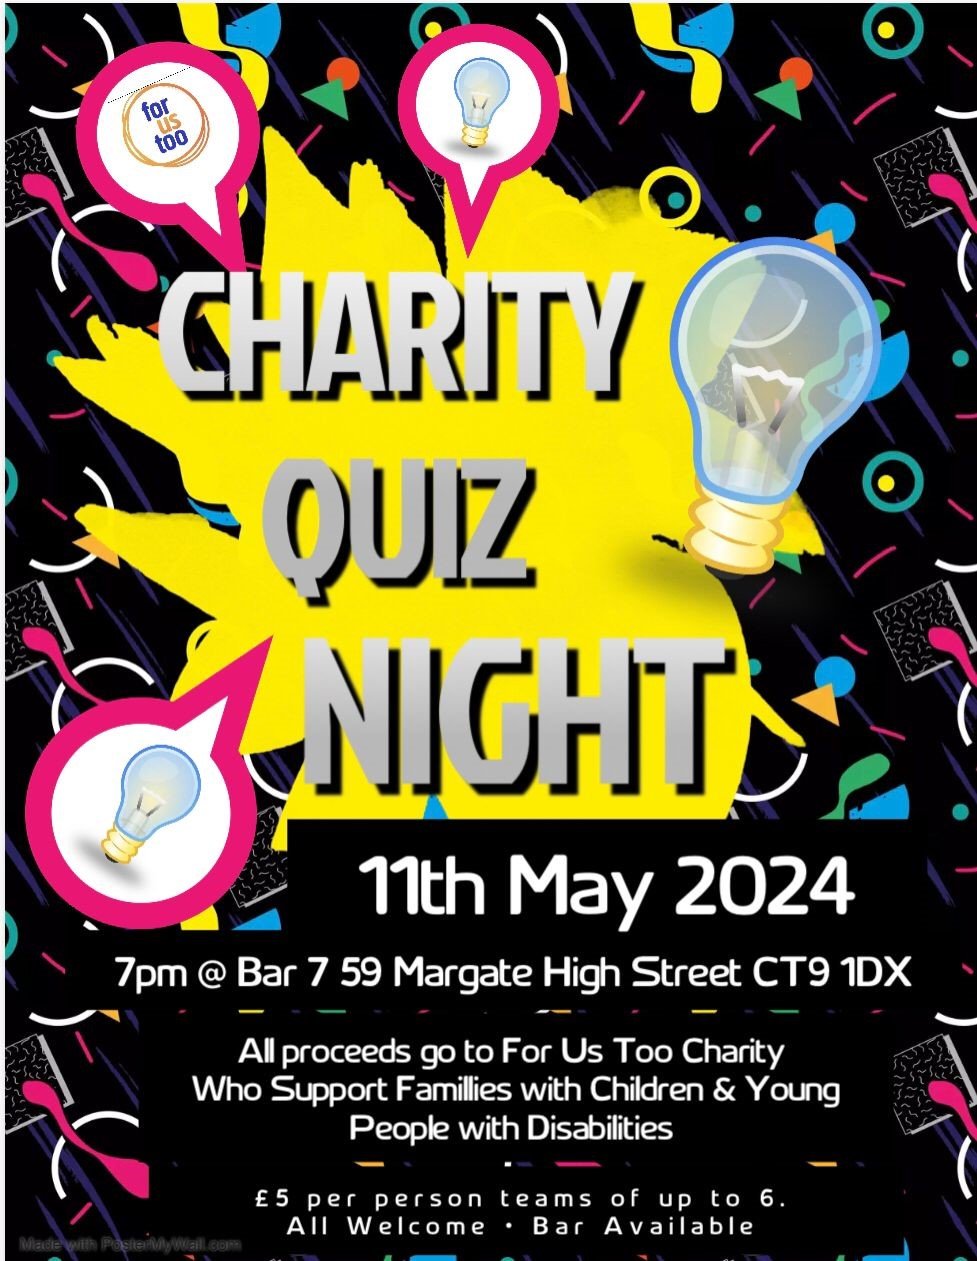 Charity Quiz Night - In aid of For Us Too 11.05.24